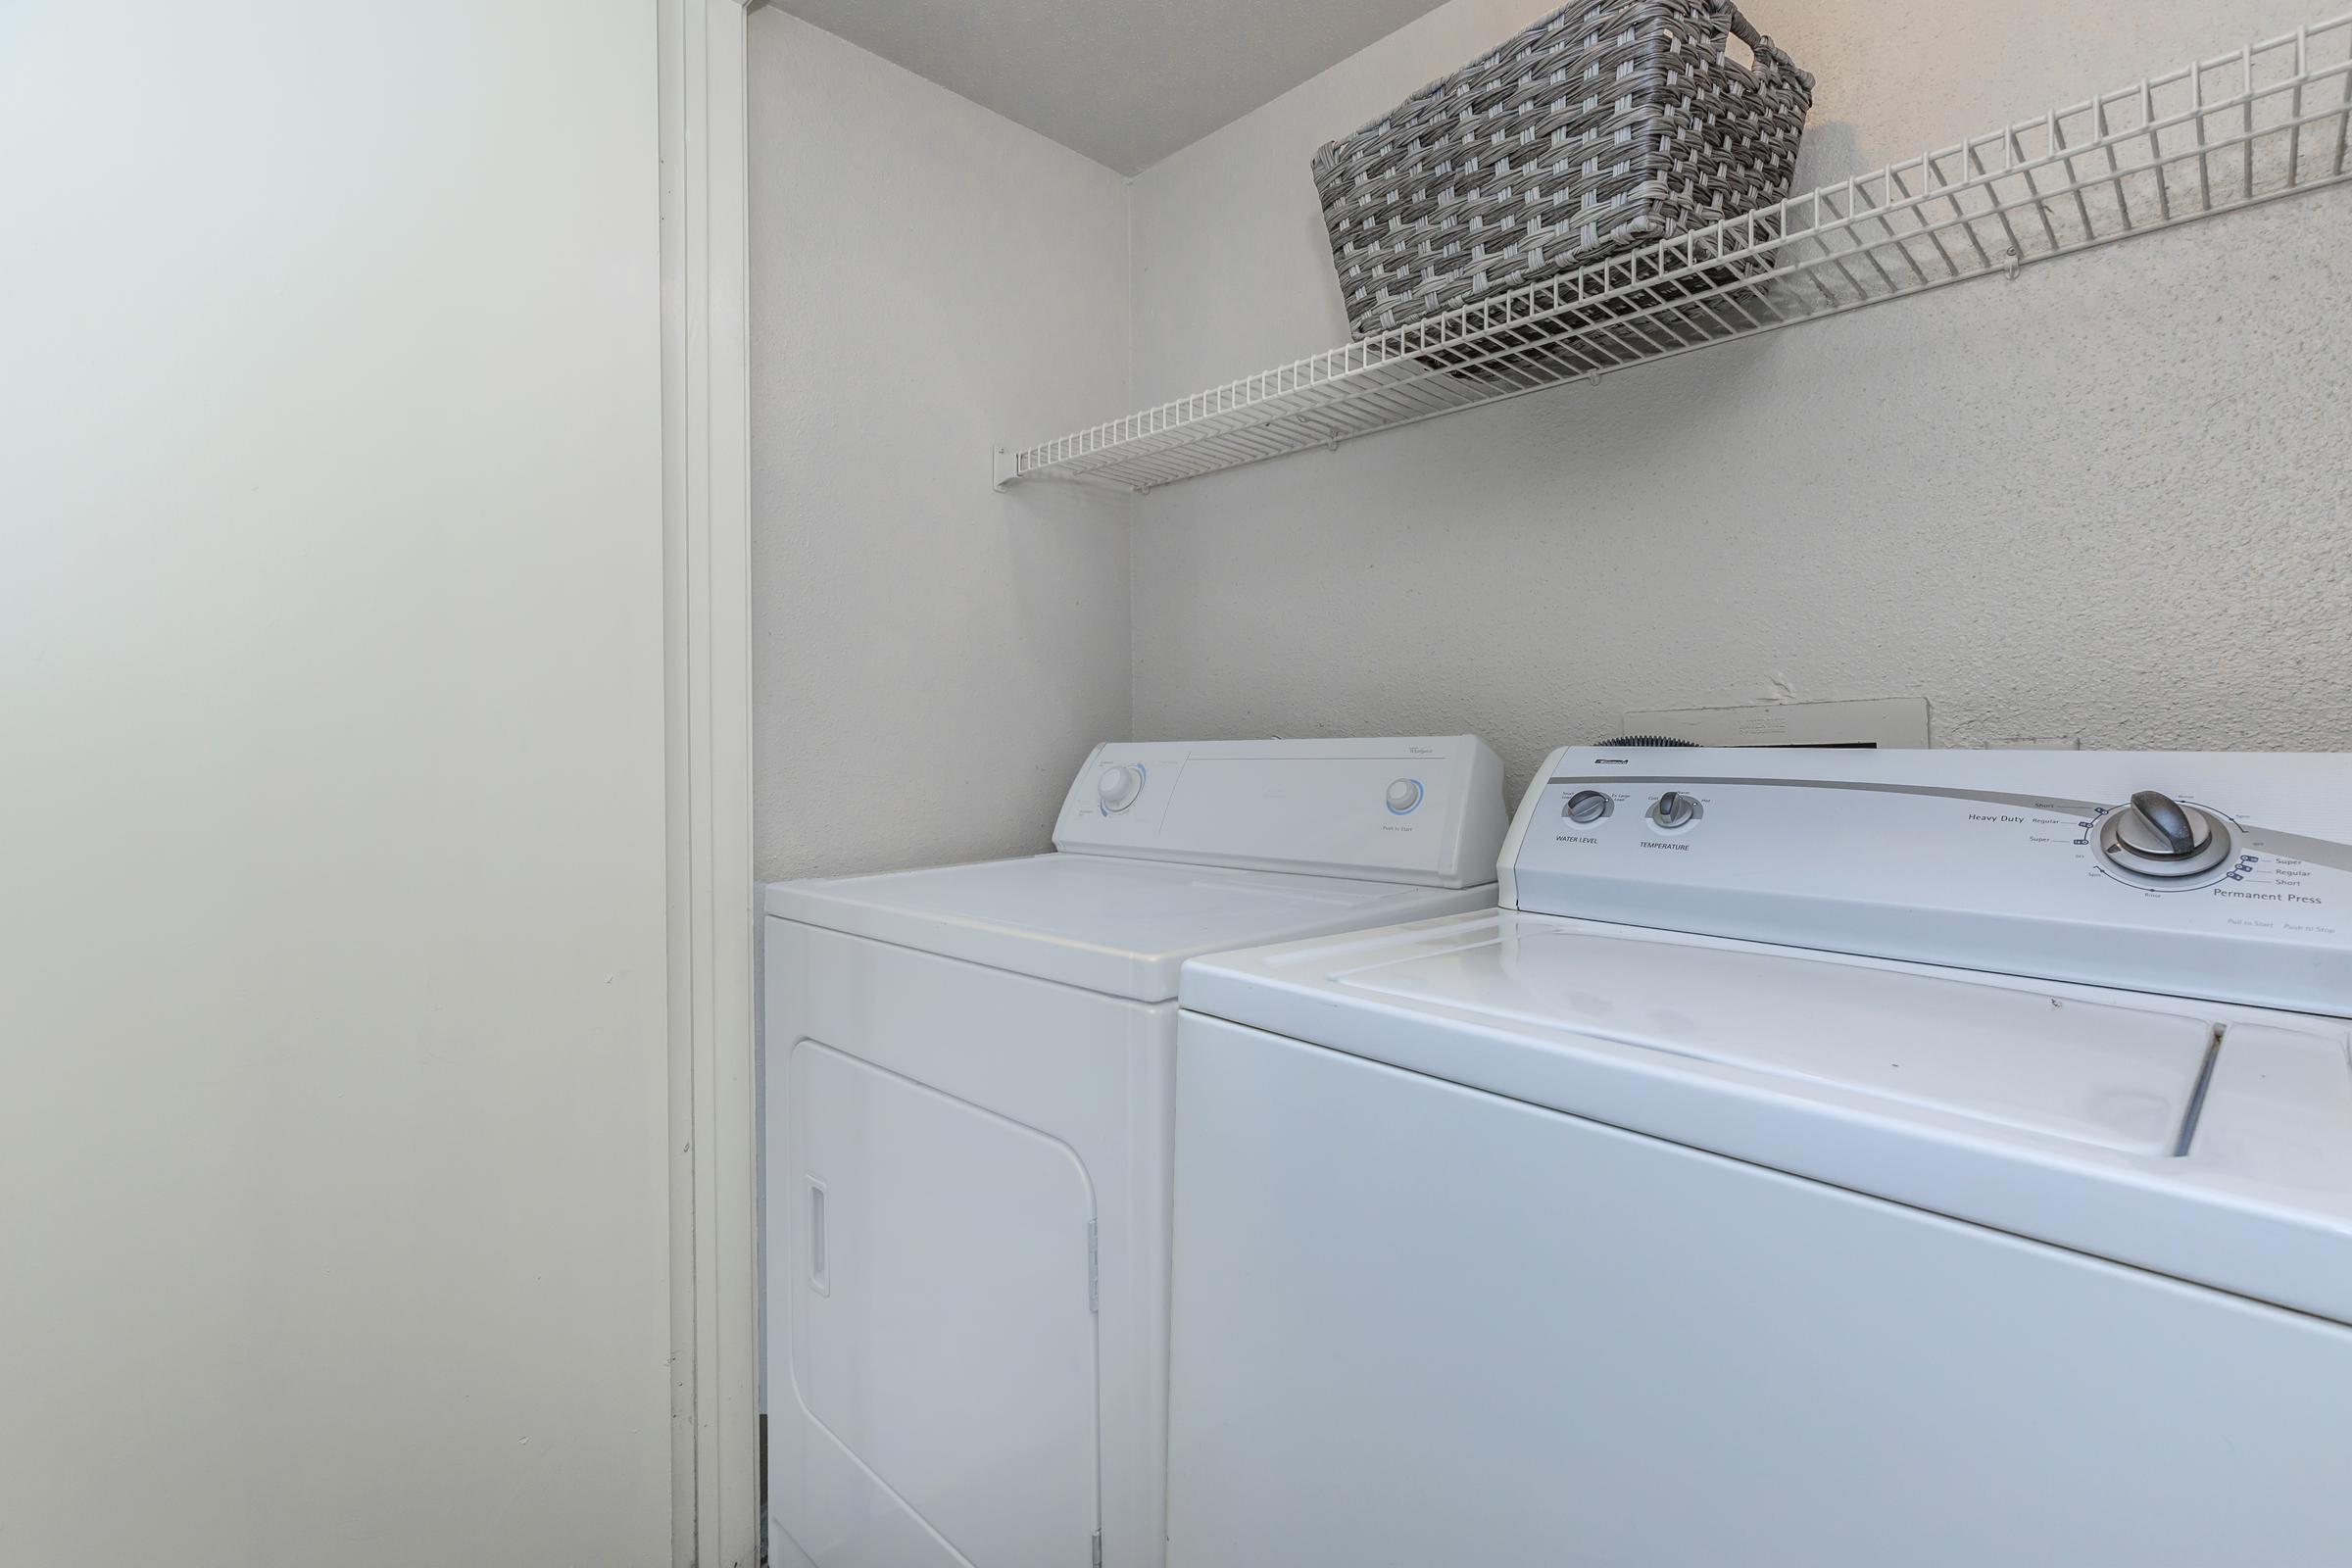 WASHERS AND DRYERS IN EVERY OAKS OF LEAGUE CITY APARTMENT